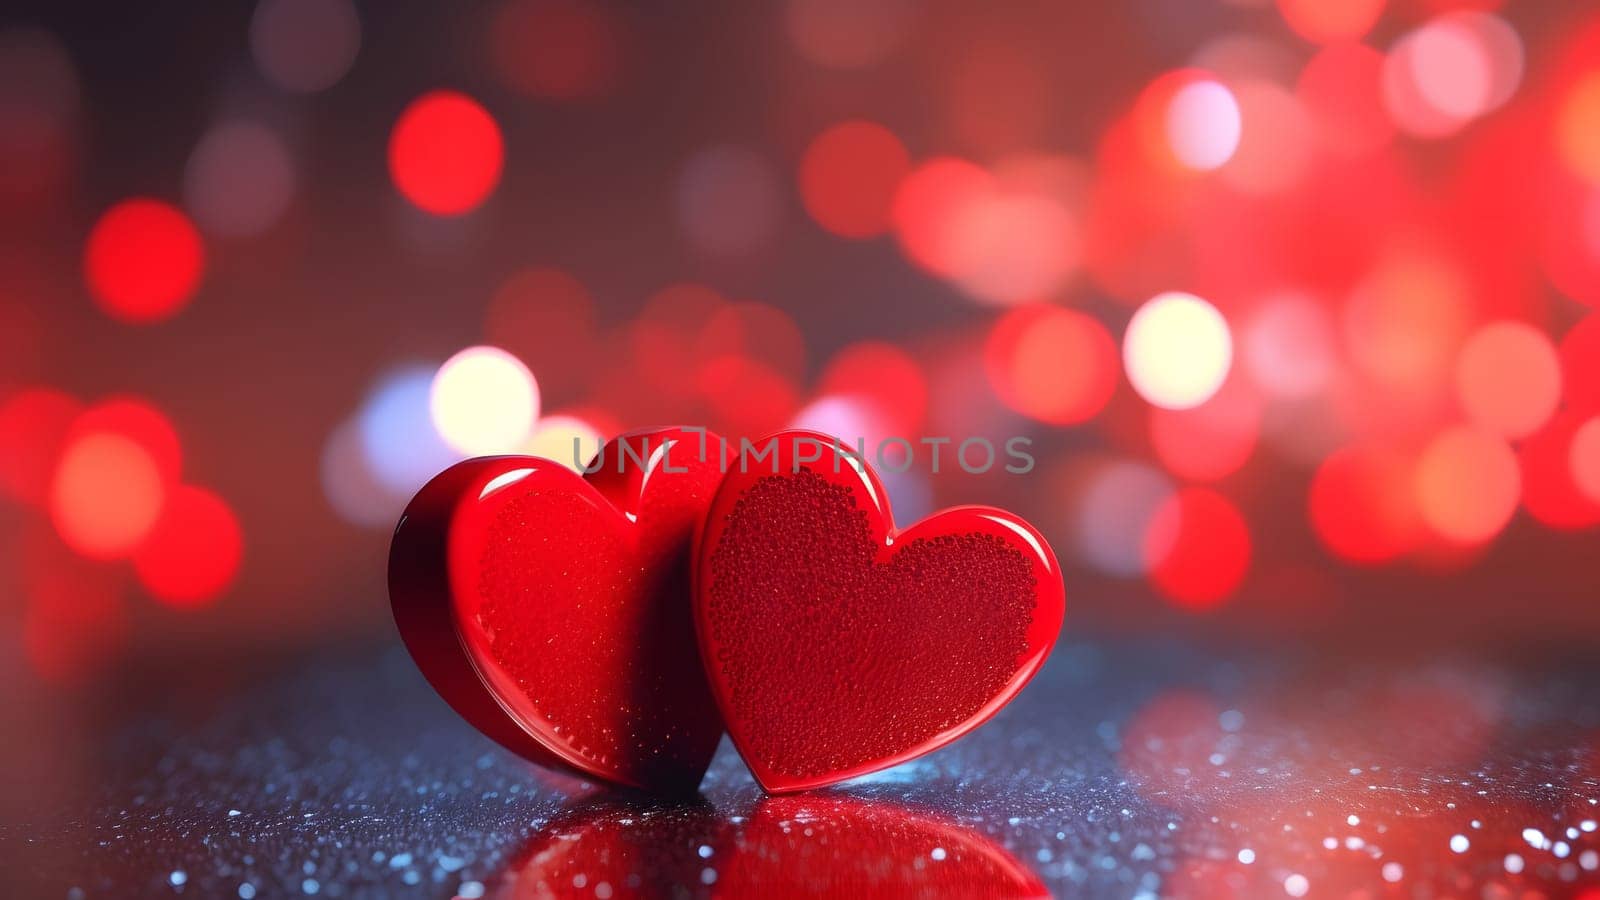 Saint Valentine day greeting card background with two red hearts against festive bokeh. Neural network generated in May 2023. Not based on any actual scene or pattern.